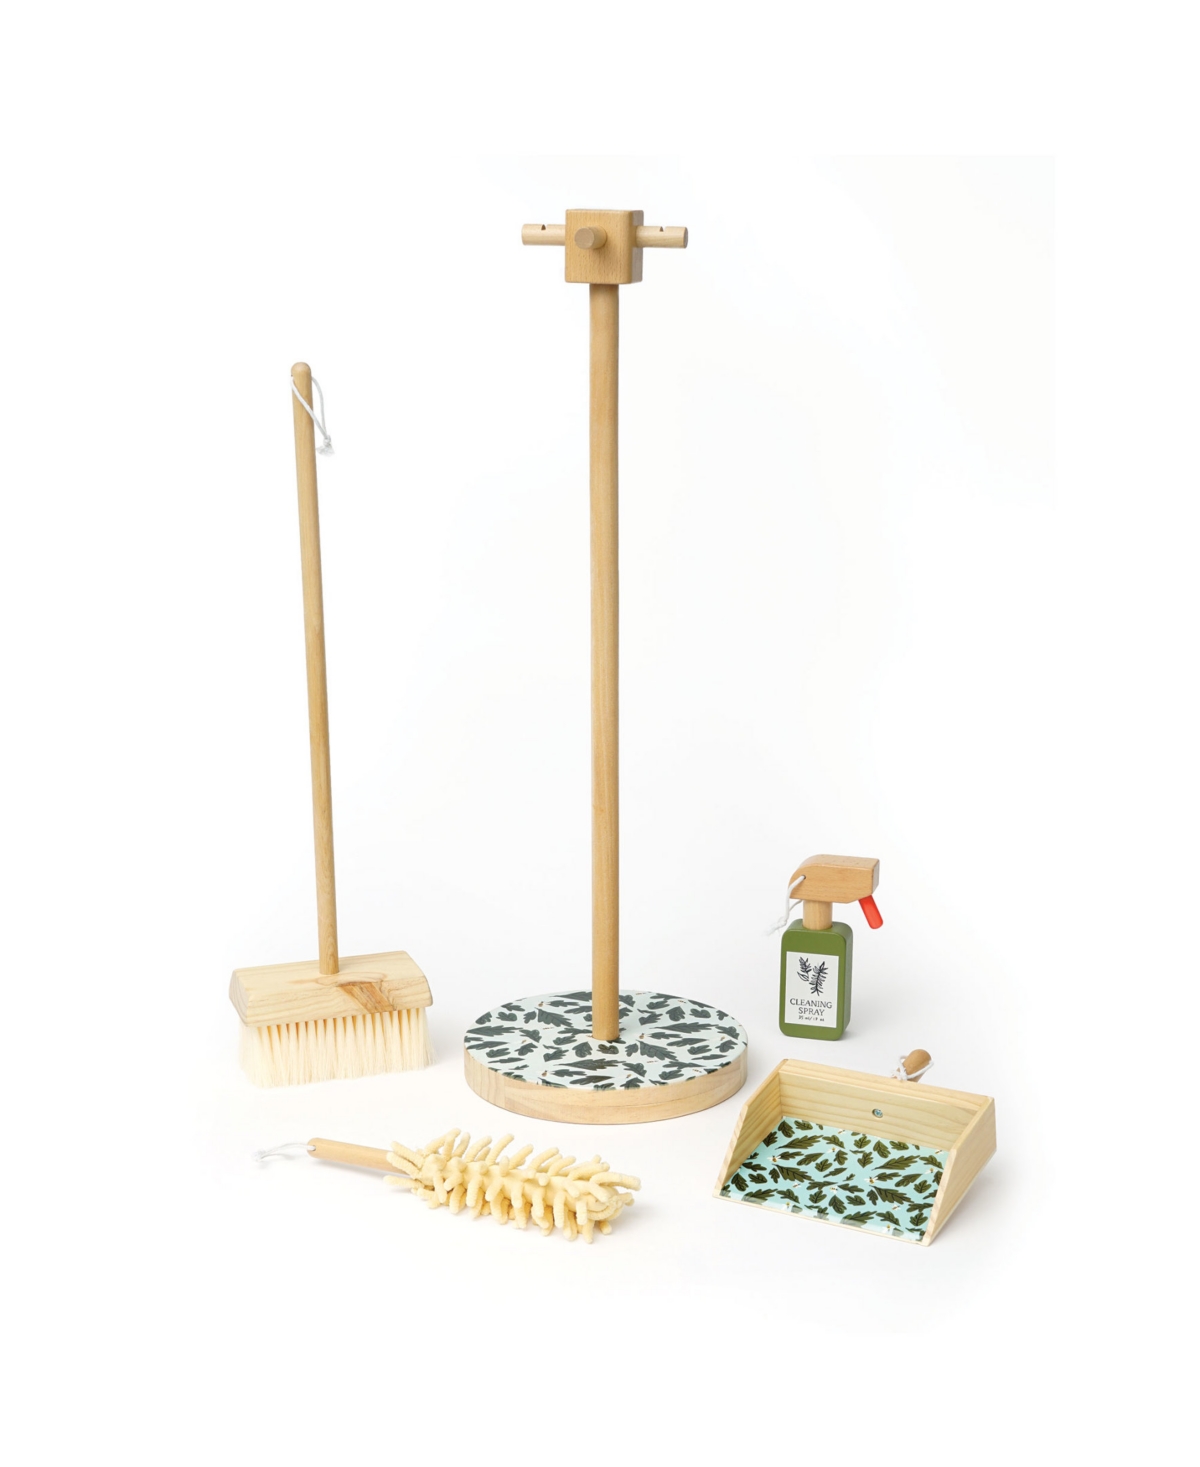 Shop Manhattan Toy Company Decorative Wooden Pretend Housekeeping Cleaning Set, 5 Piece In Multicolor